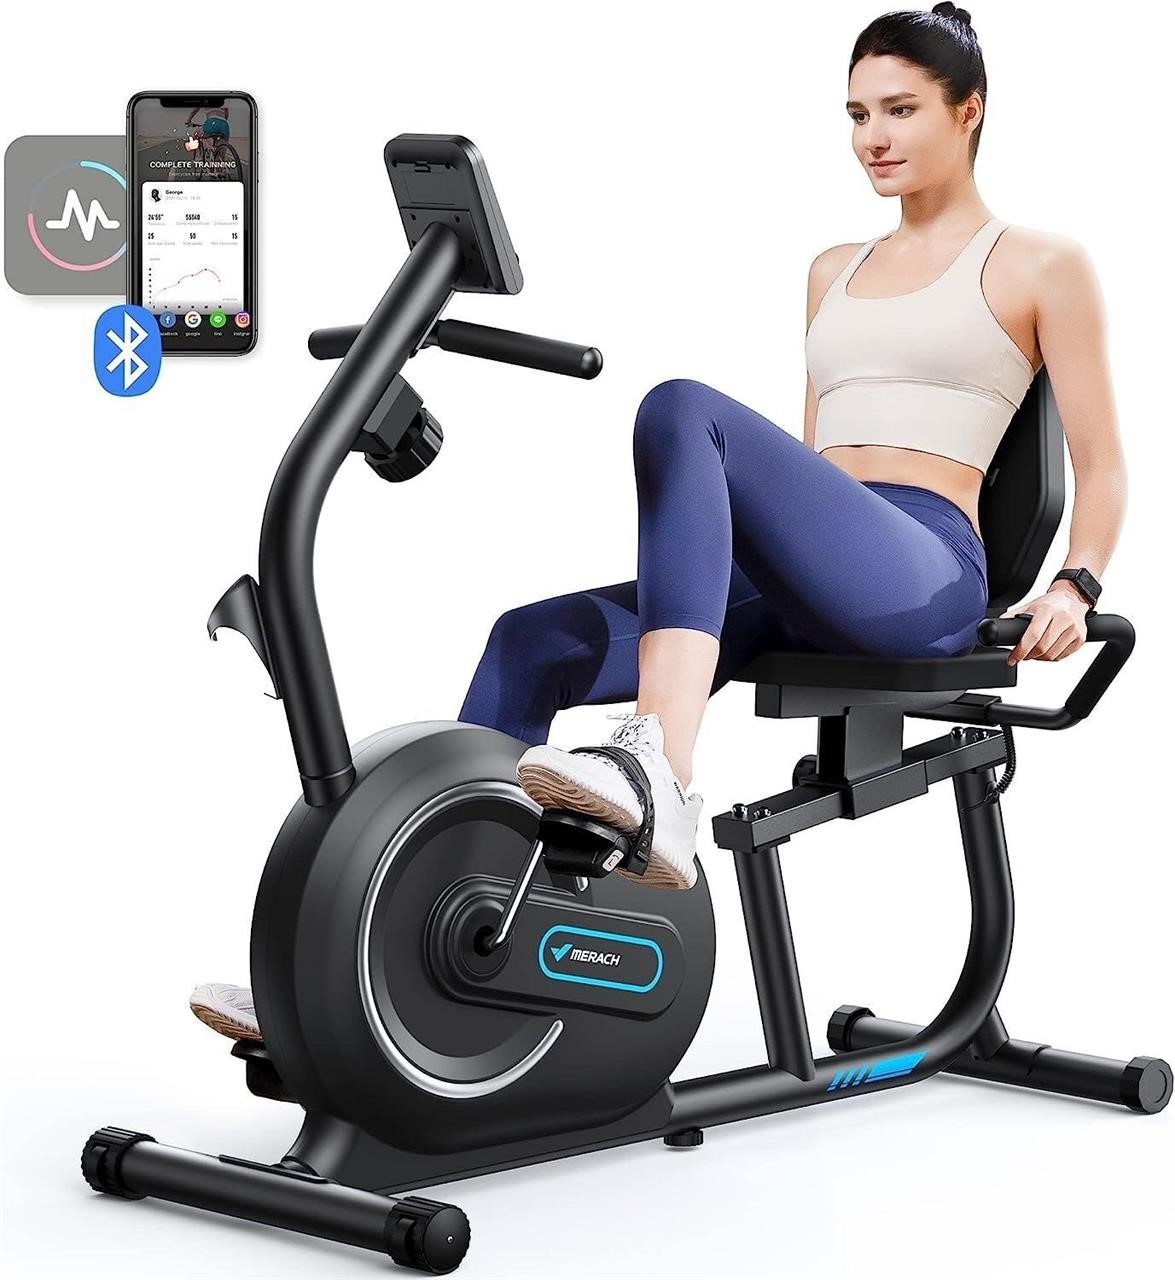 MERACH Recumbent Exercise Bike for Home Bluetooth